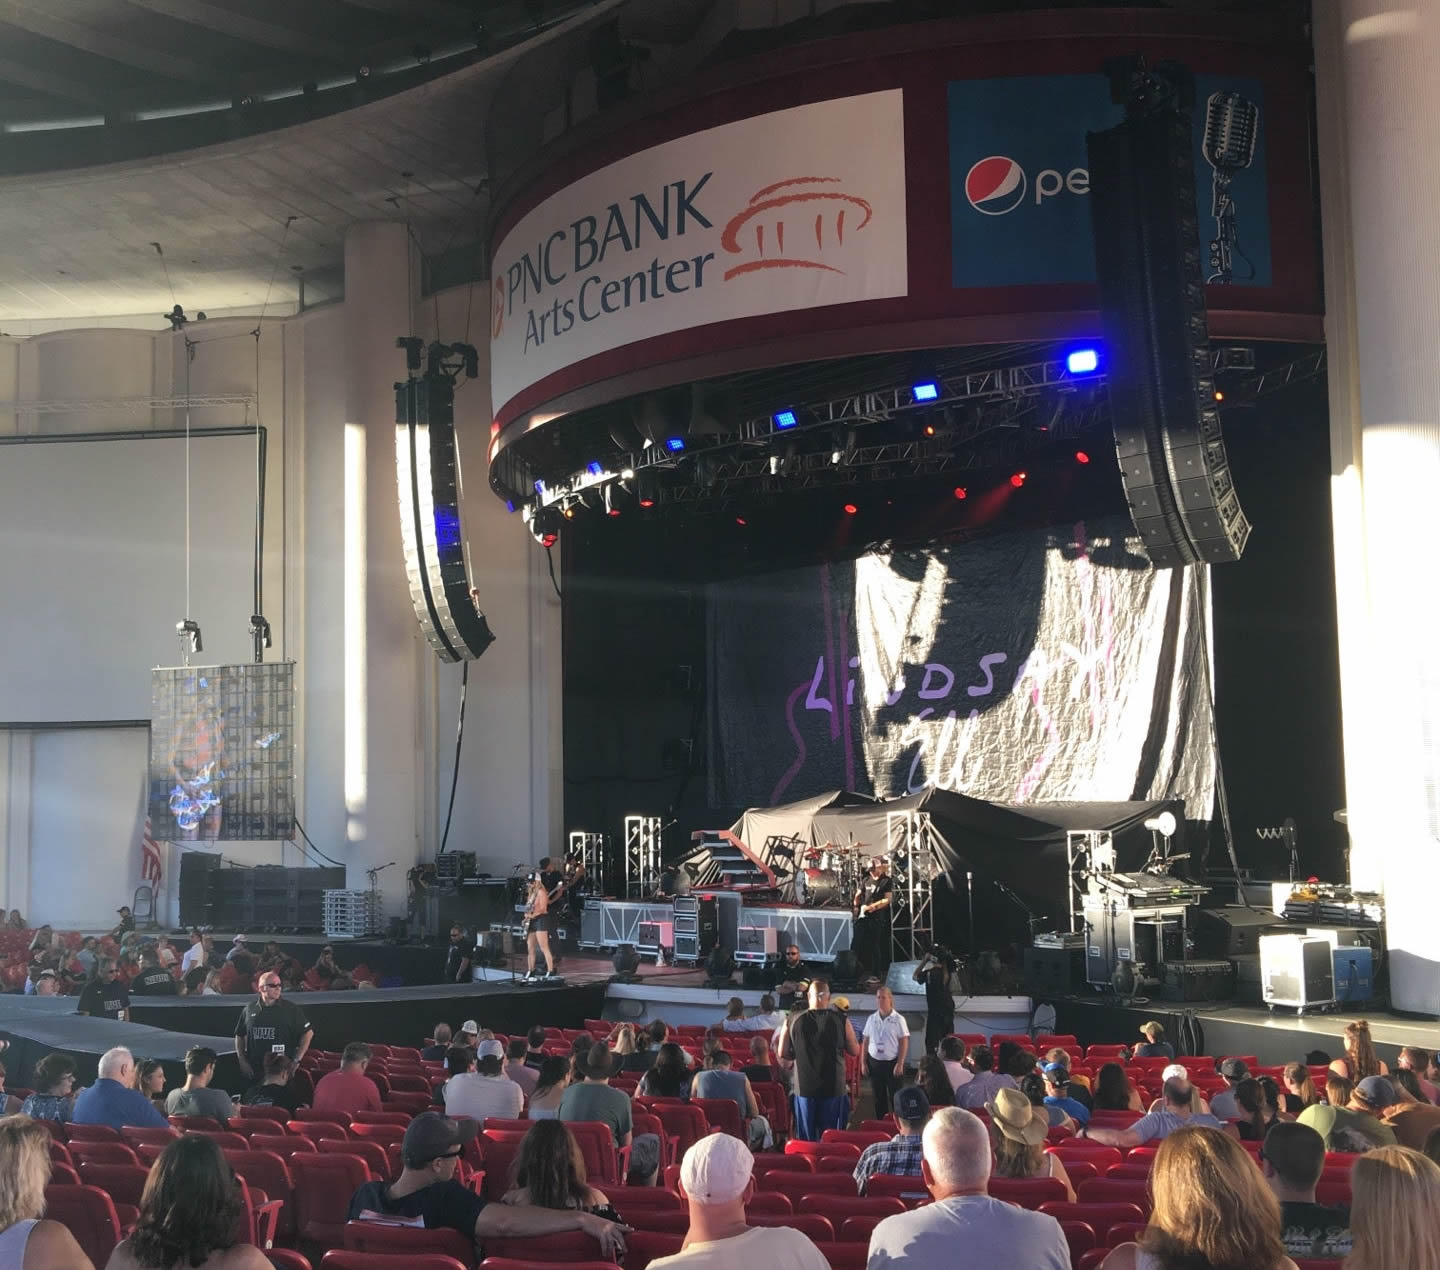 section 101 seat view  - pnc bank arts center